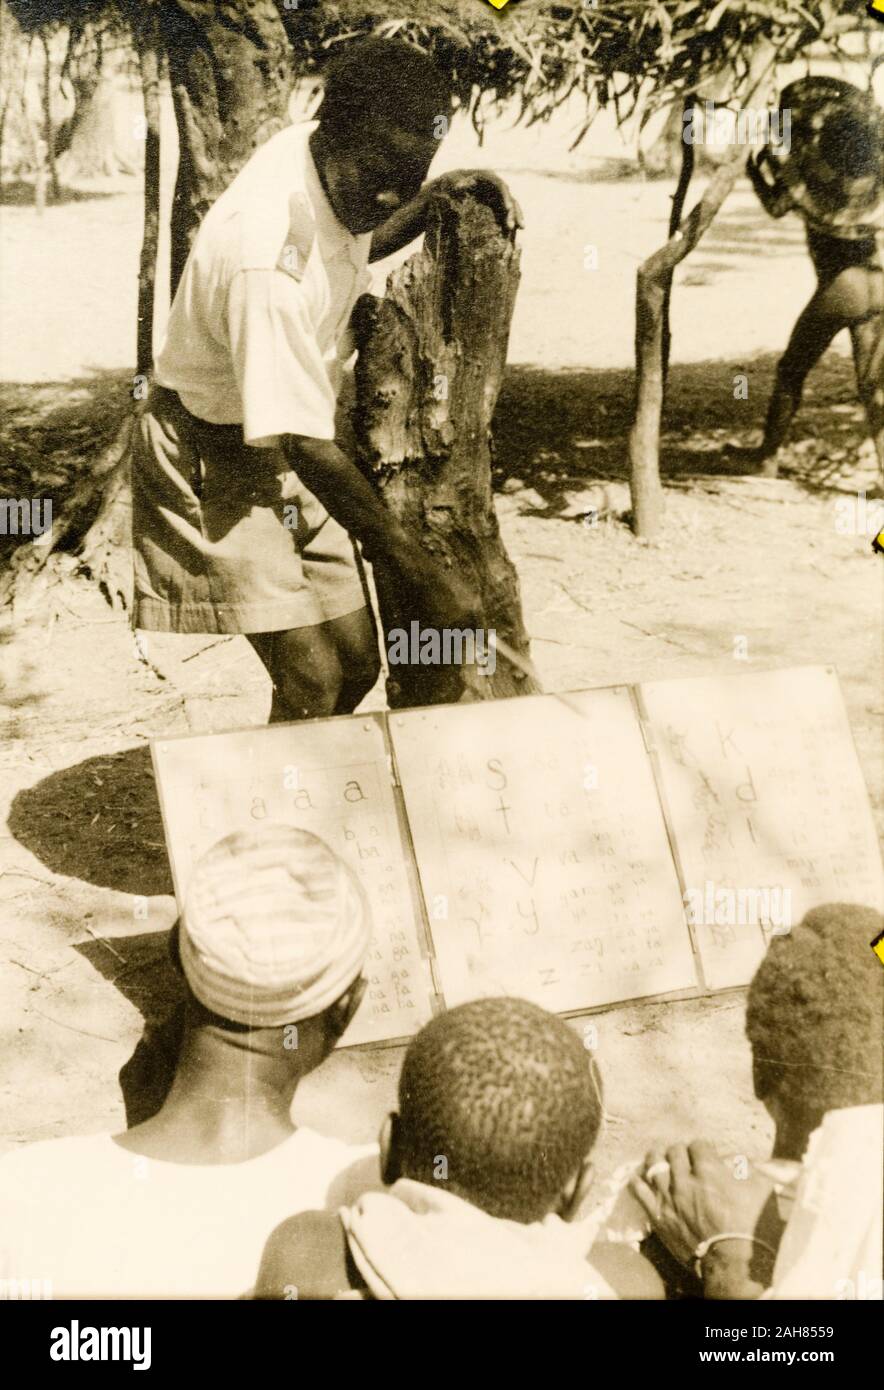 Gold CoastGhana, A student teacher helps men to read from a board during a literacy class; part of a mass literacy campaign launched by the British government in 1951 to improve literacy skills amongst African adults, both in their own languages and in English. Original manuscript caption: Mass literacy class, NTs [Northern Territories], 1951-52. 1995/076/5/2/2/69. Stock Photo